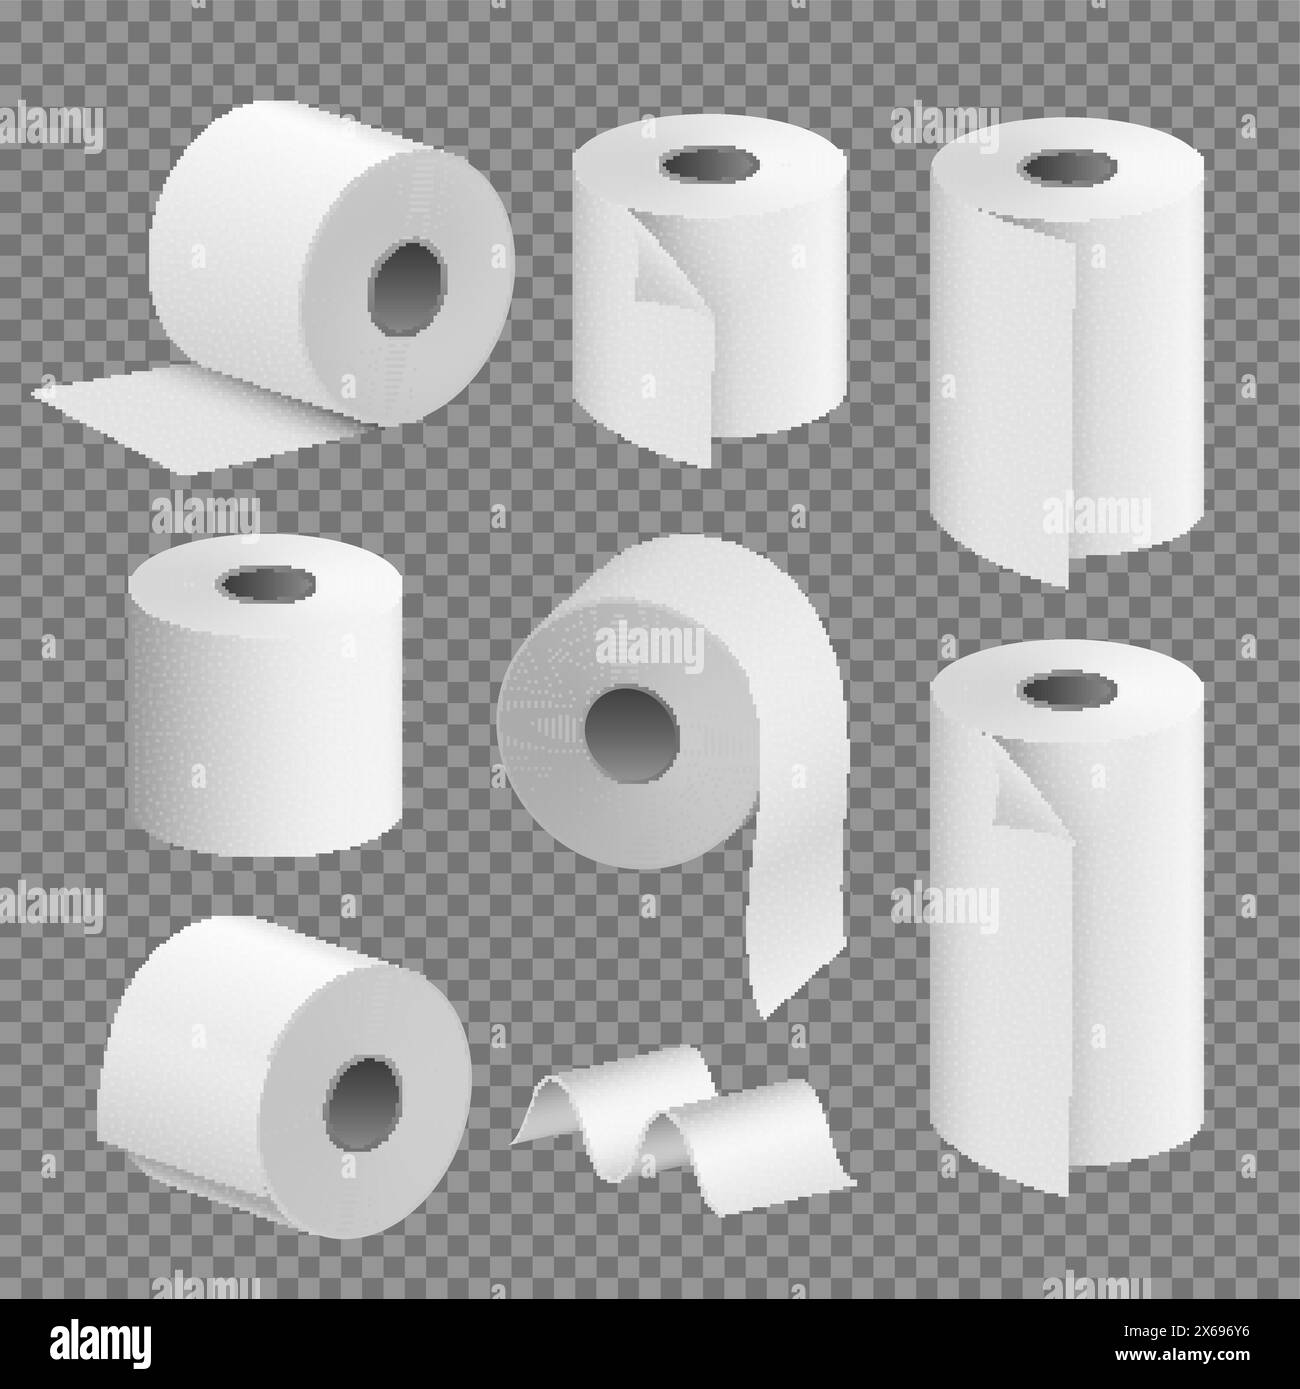 Toilet paper roll tissue. Toilet towel icon isolated realistic illustration. Kitchen wc whute tape paper Stock Vector